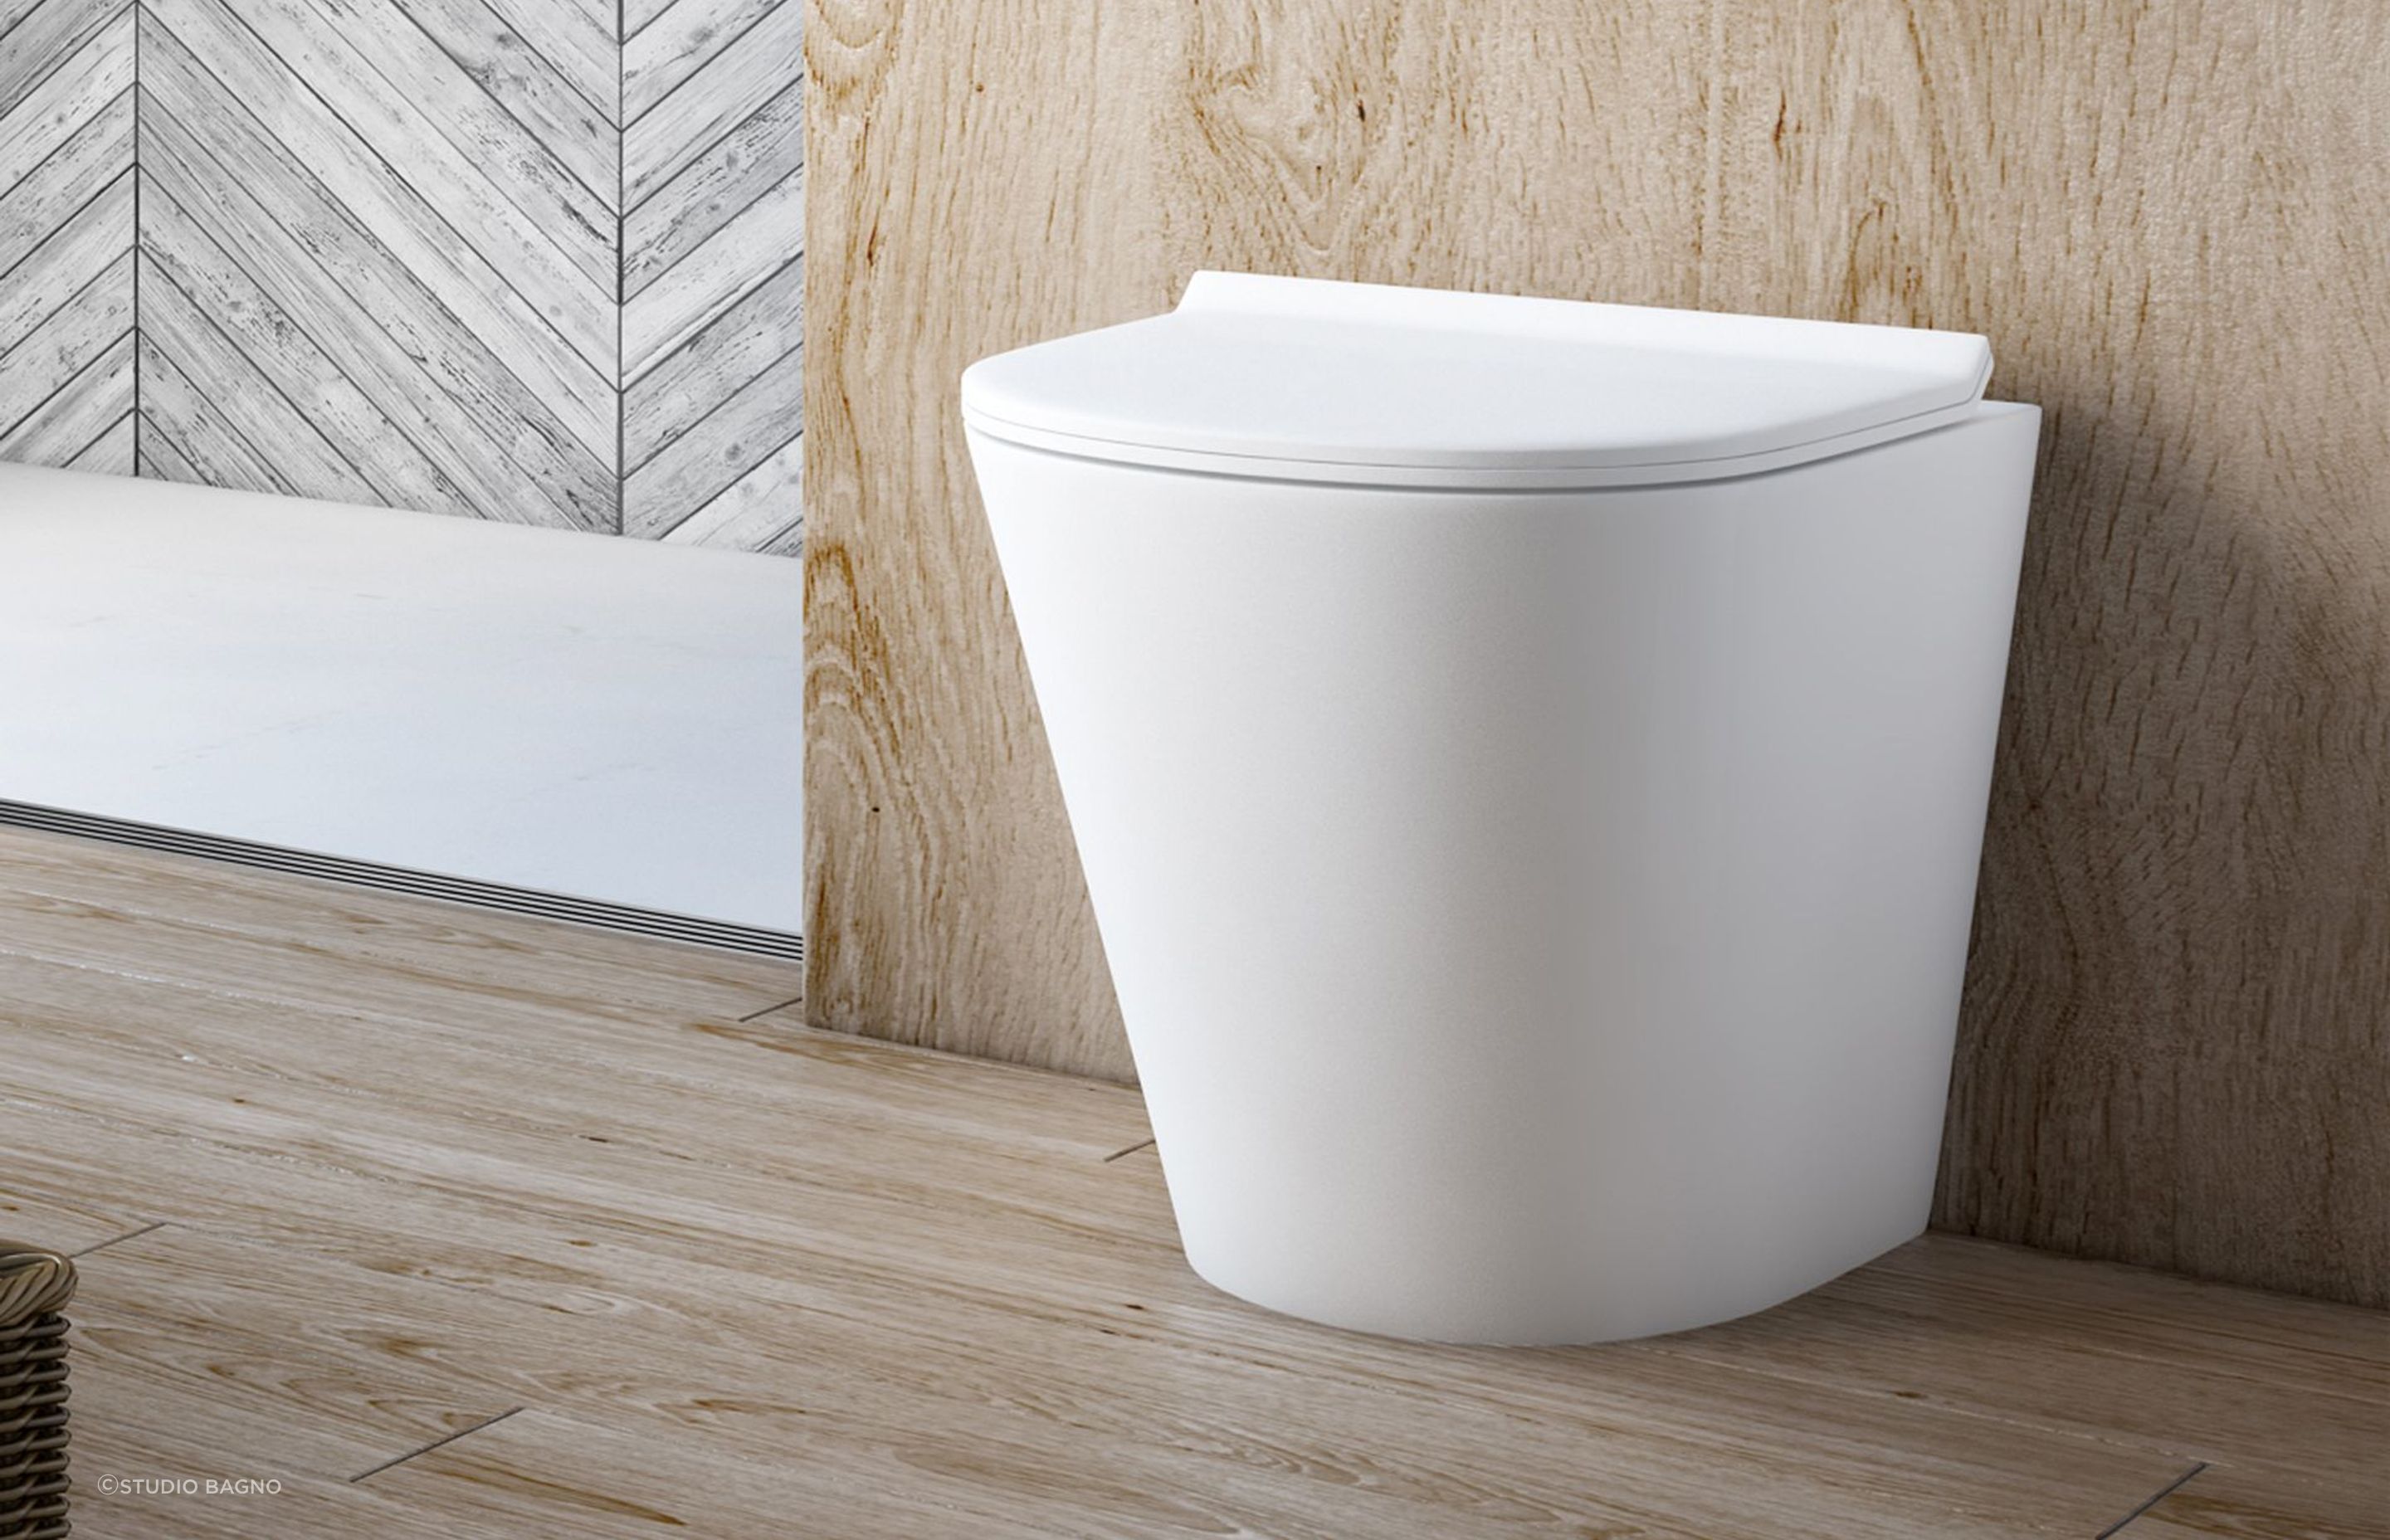 Manhattan Rimless Wall Faced Toilet from Studio Bagno